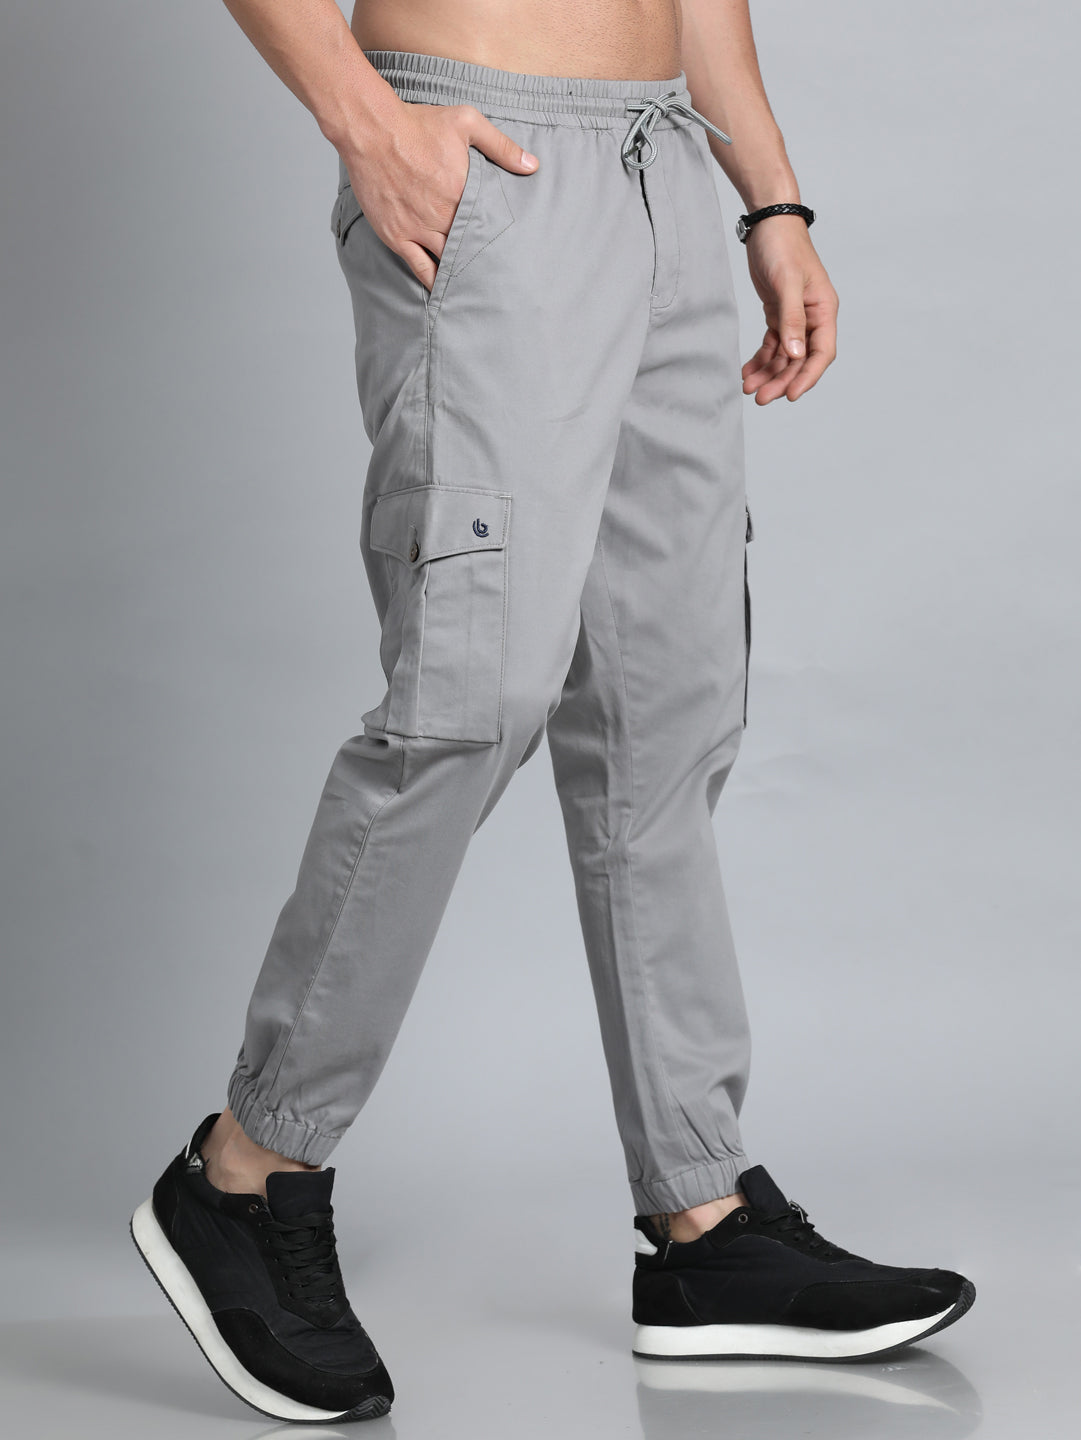 CSHQ Cargo Pants for Men Solid Casual Multiple Pockets Outdoor Straight  Type Fitness Pants Cargo Pants Trousers Gray at Amazon Men's Clothing store